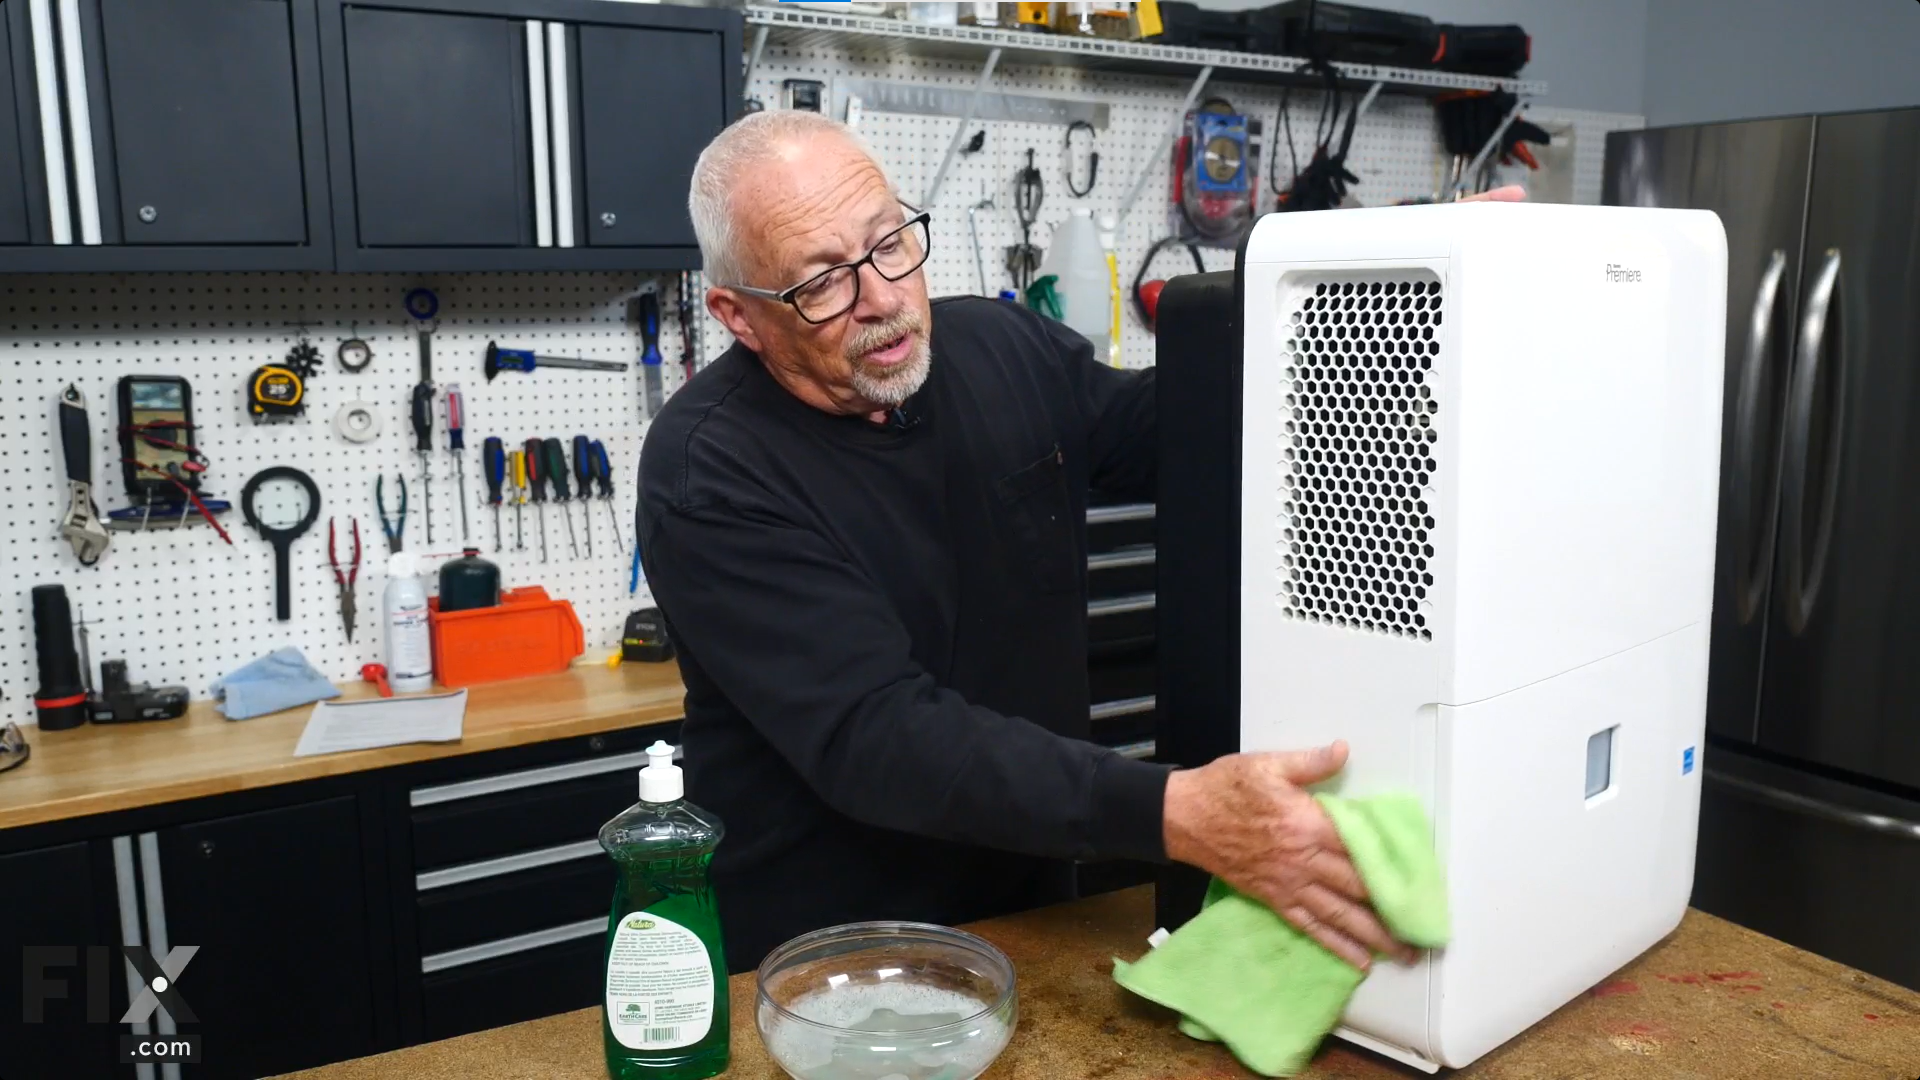 A repair technician, beside a bowl of soapy water, wiping a dehumidifier's plastic casing with a green microfiber cloth.